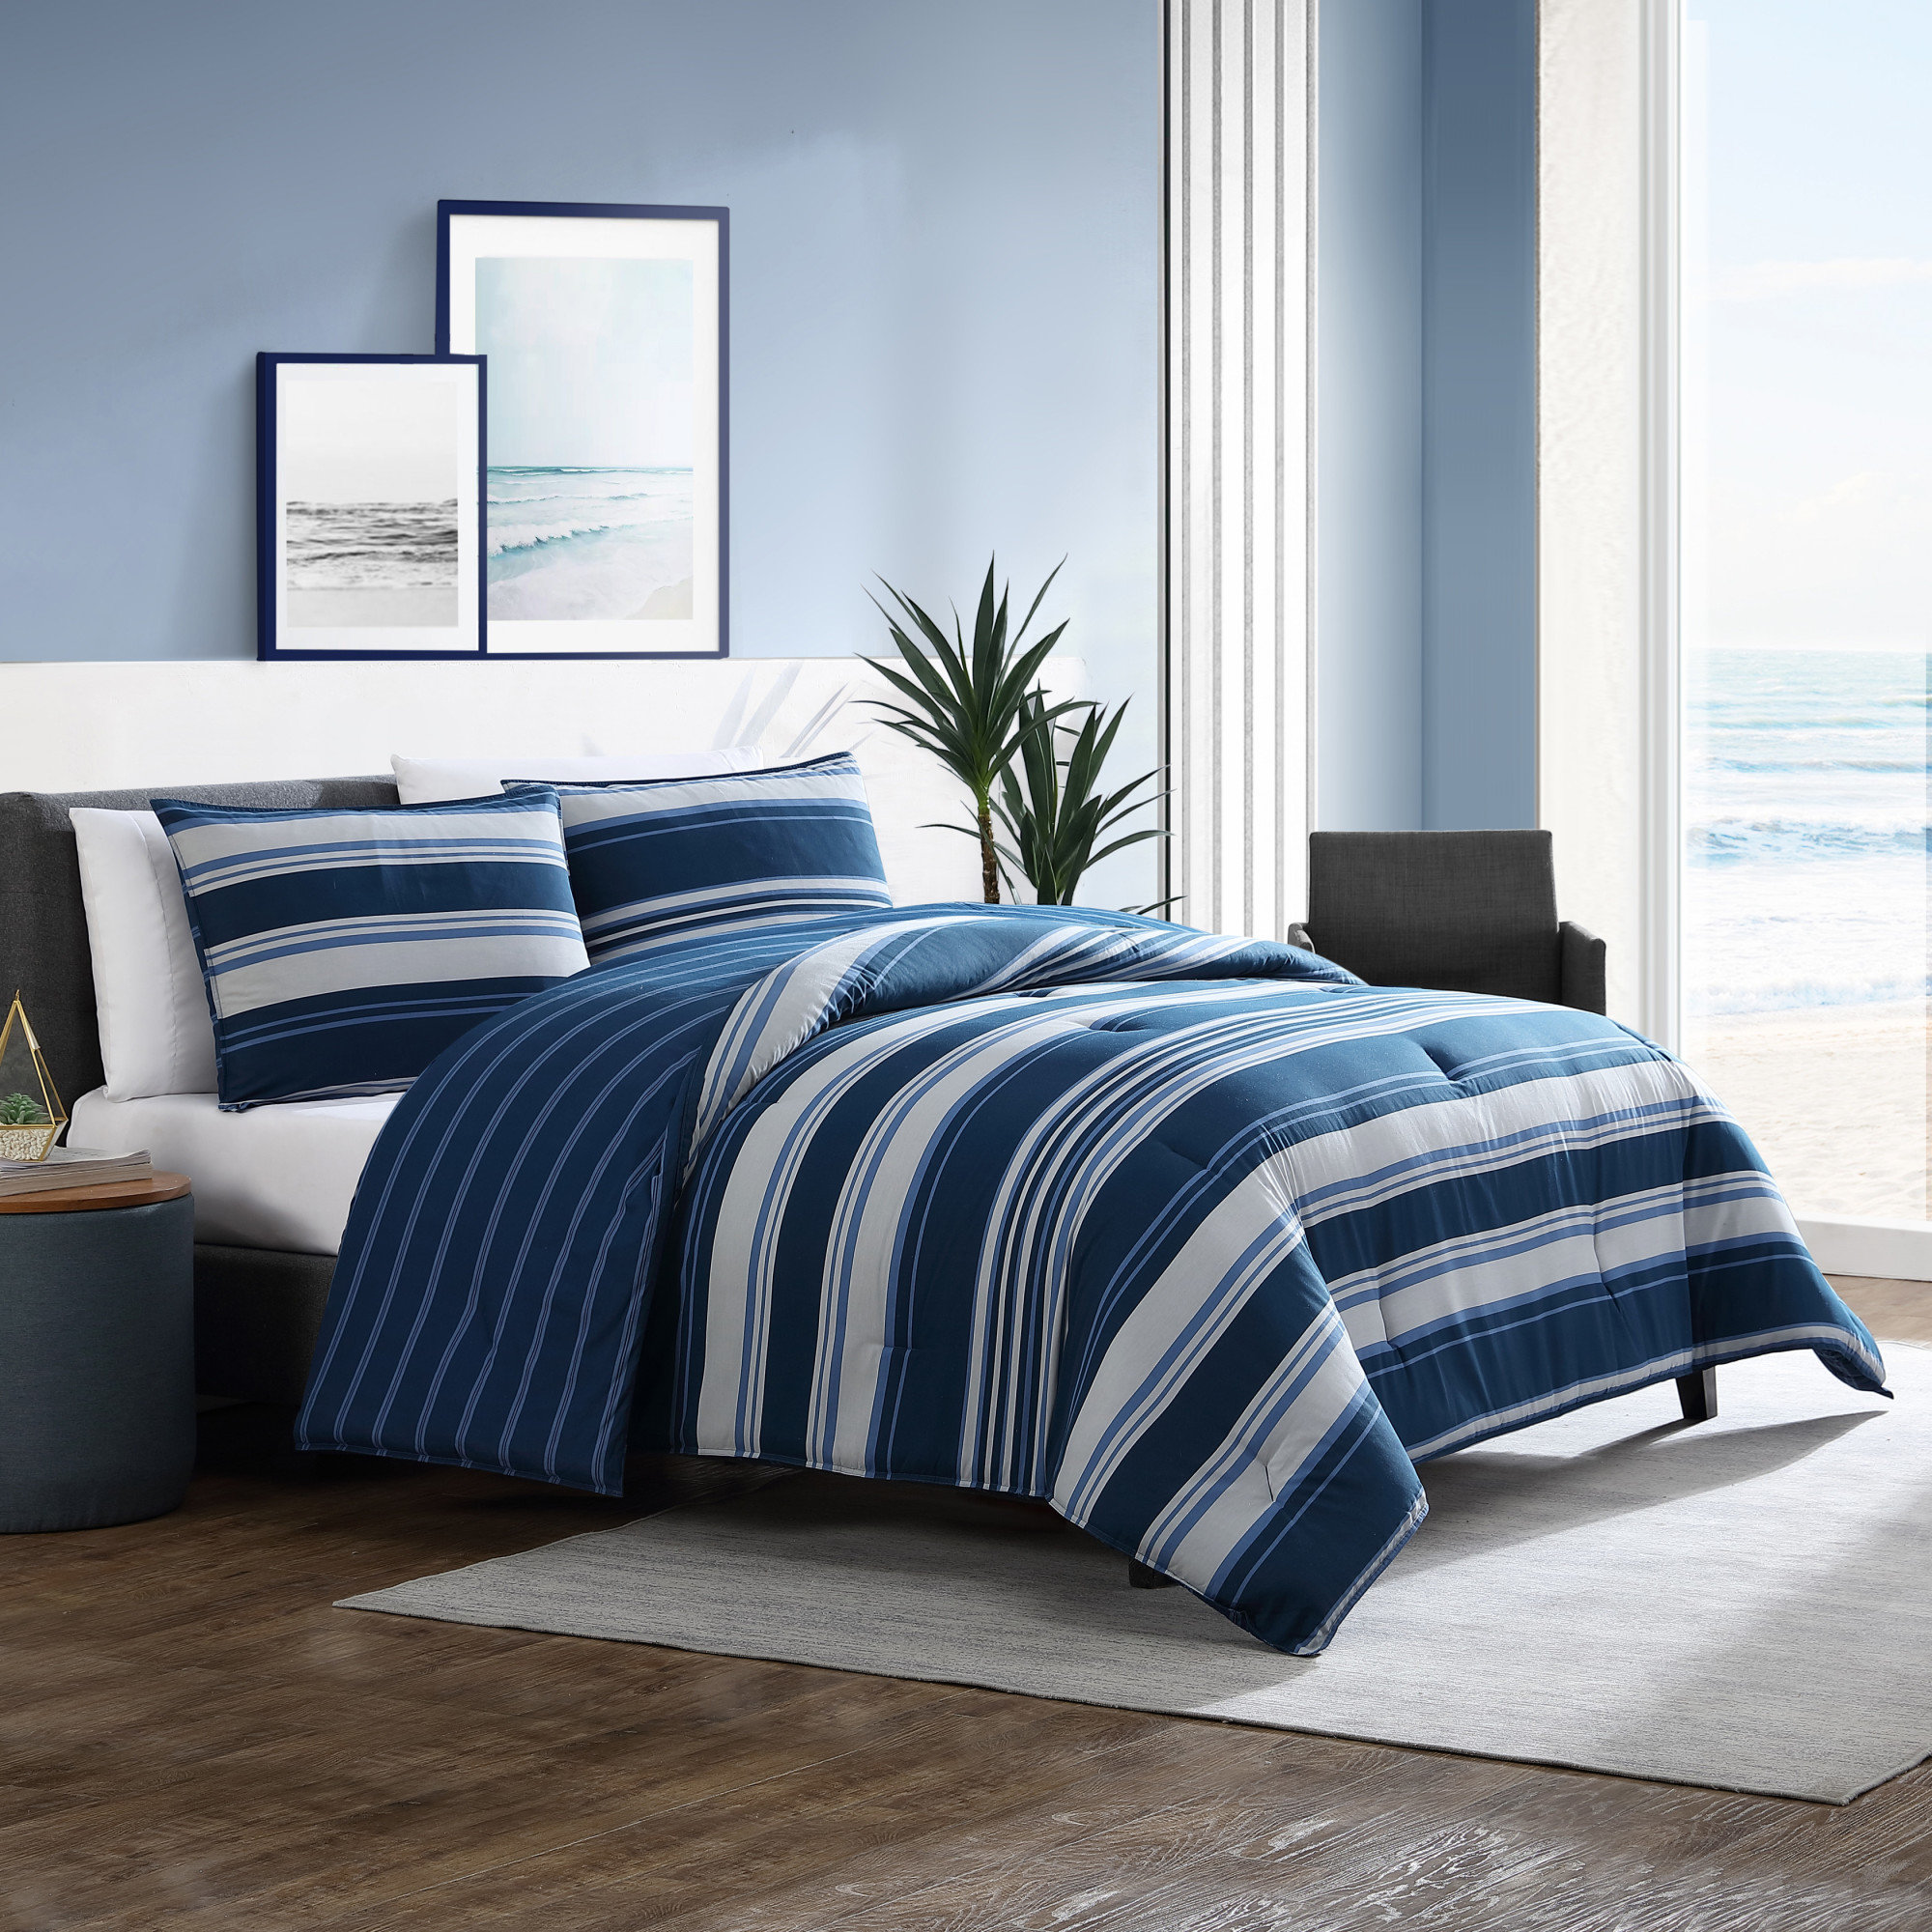 Nautica - Queen Comforter Set, Cotton Reversible Bedding with Matching  Shams, Stylish Home Decor (Longpoint Blue, Queen)